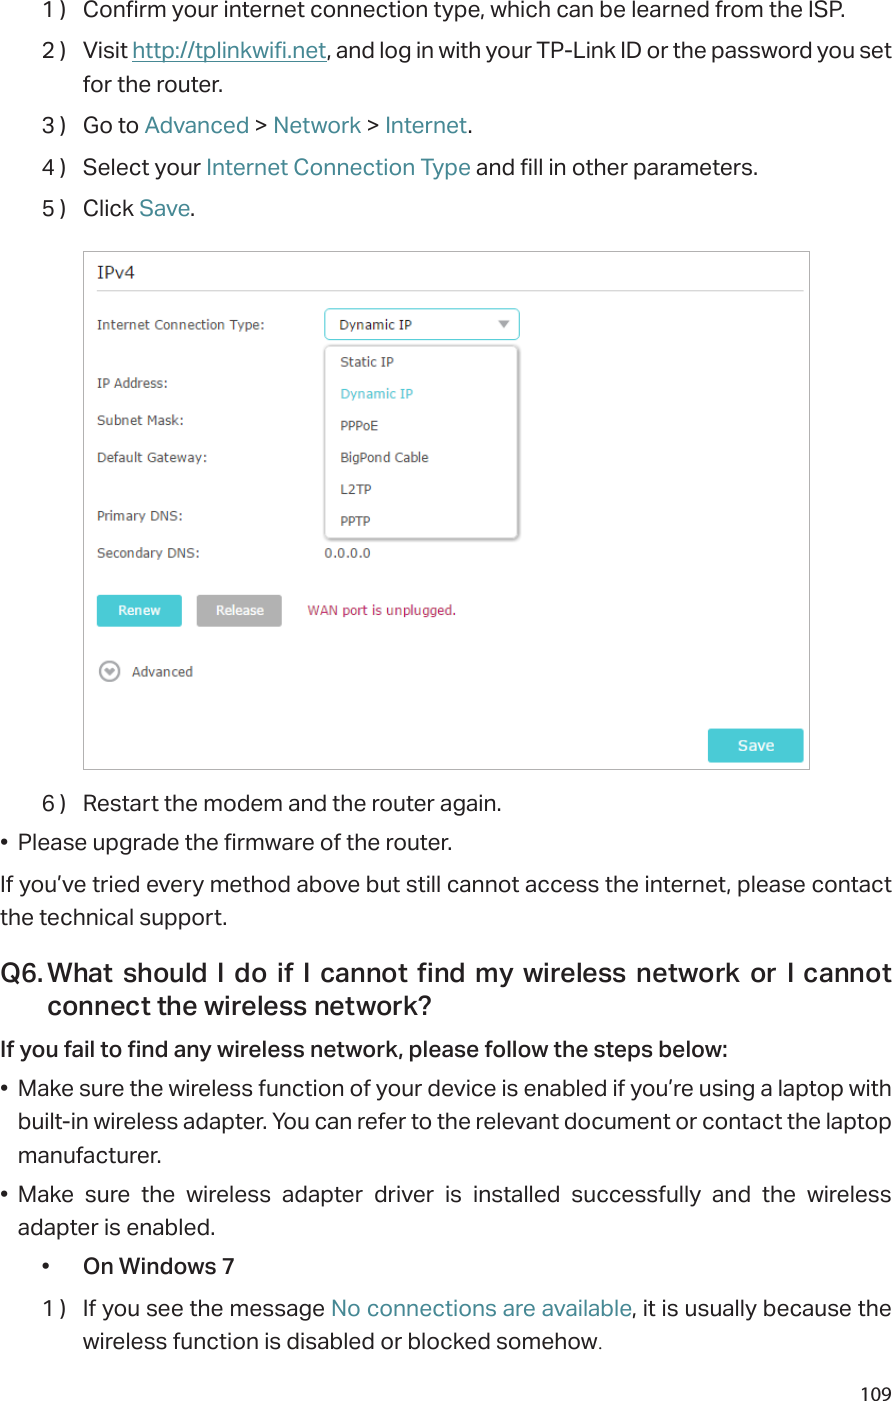 1091 )  Confirm your internet connection type, which can be learned from the ISP.2 )  Visit http://tplinkwifi.net, and log in with your TP-Link ID or the password you set for the router.3 )  Go to Advanced &gt; Network &gt; Internet.4 )  Select your Internet Connection Type and fill in other parameters.5 )  Click Save.6 )  Restart the modem and the router again.•  Please upgrade the firmware of the router.If you’ve tried every method above but still cannot access the internet, please contact the technical support.Q6. What should I do if I cannot find my wireless network or I cannot connect the wireless network?If you fail to find any wireless network, please follow the steps below:•  Make sure the wireless function of your device is enabled if you’re using a laptop with built-in wireless adapter. You can refer to the relevant document or contact the laptop manufacturer.•  Make sure the wireless adapter driver is installed successfully and the wireless adapter is enabled.•  On Windows 71 )  If you see the message No connections are available, it is usually because the wireless function is disabled or blocked somehow.